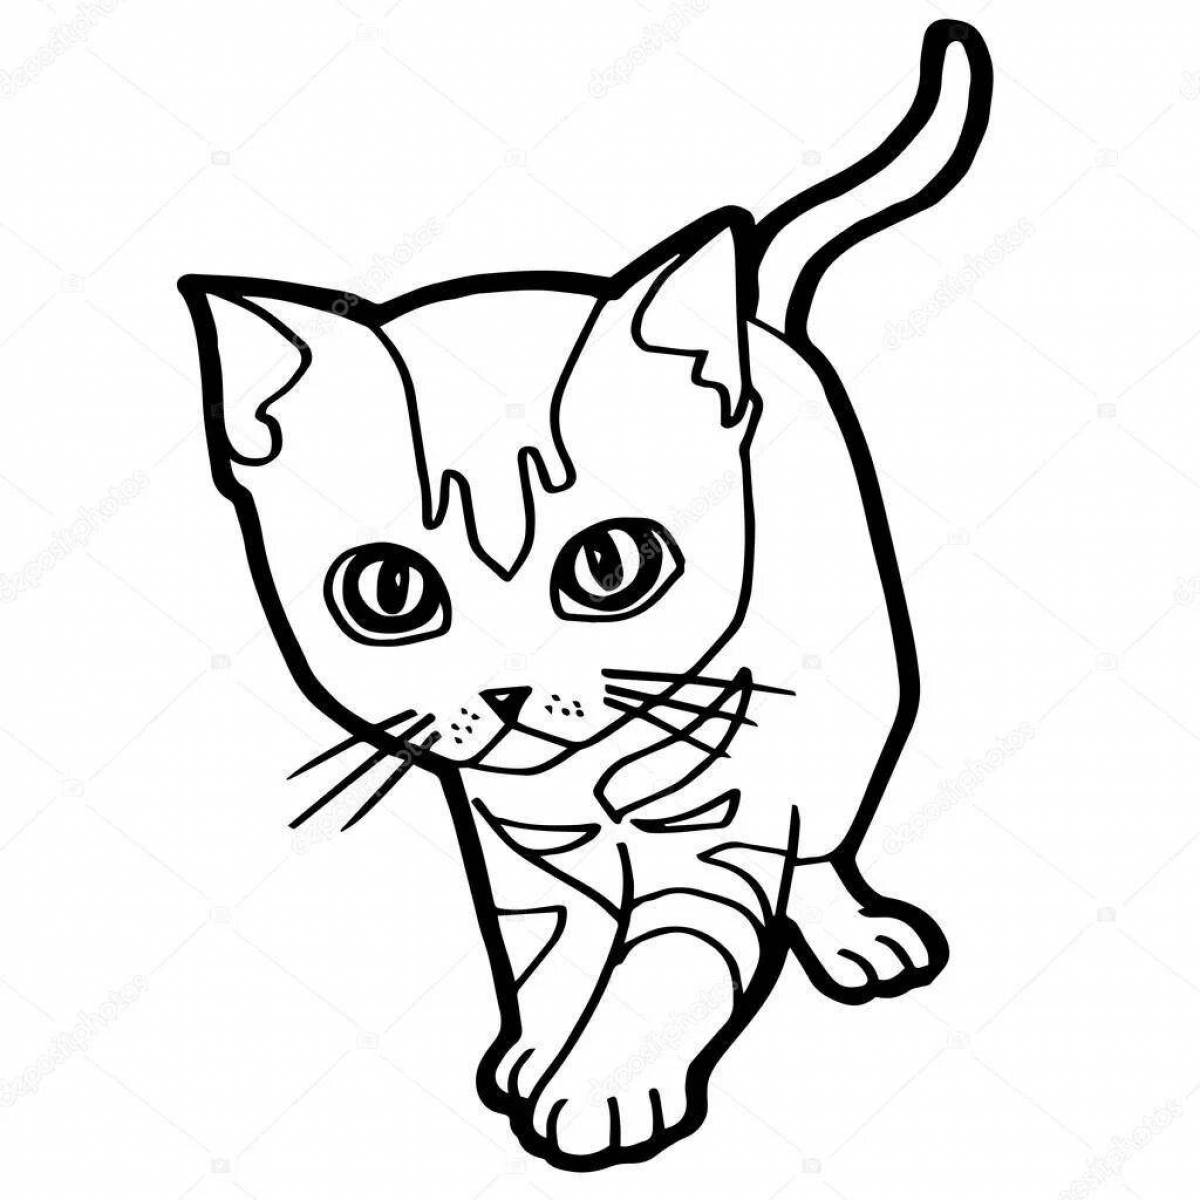 Coloring page adorable cat man